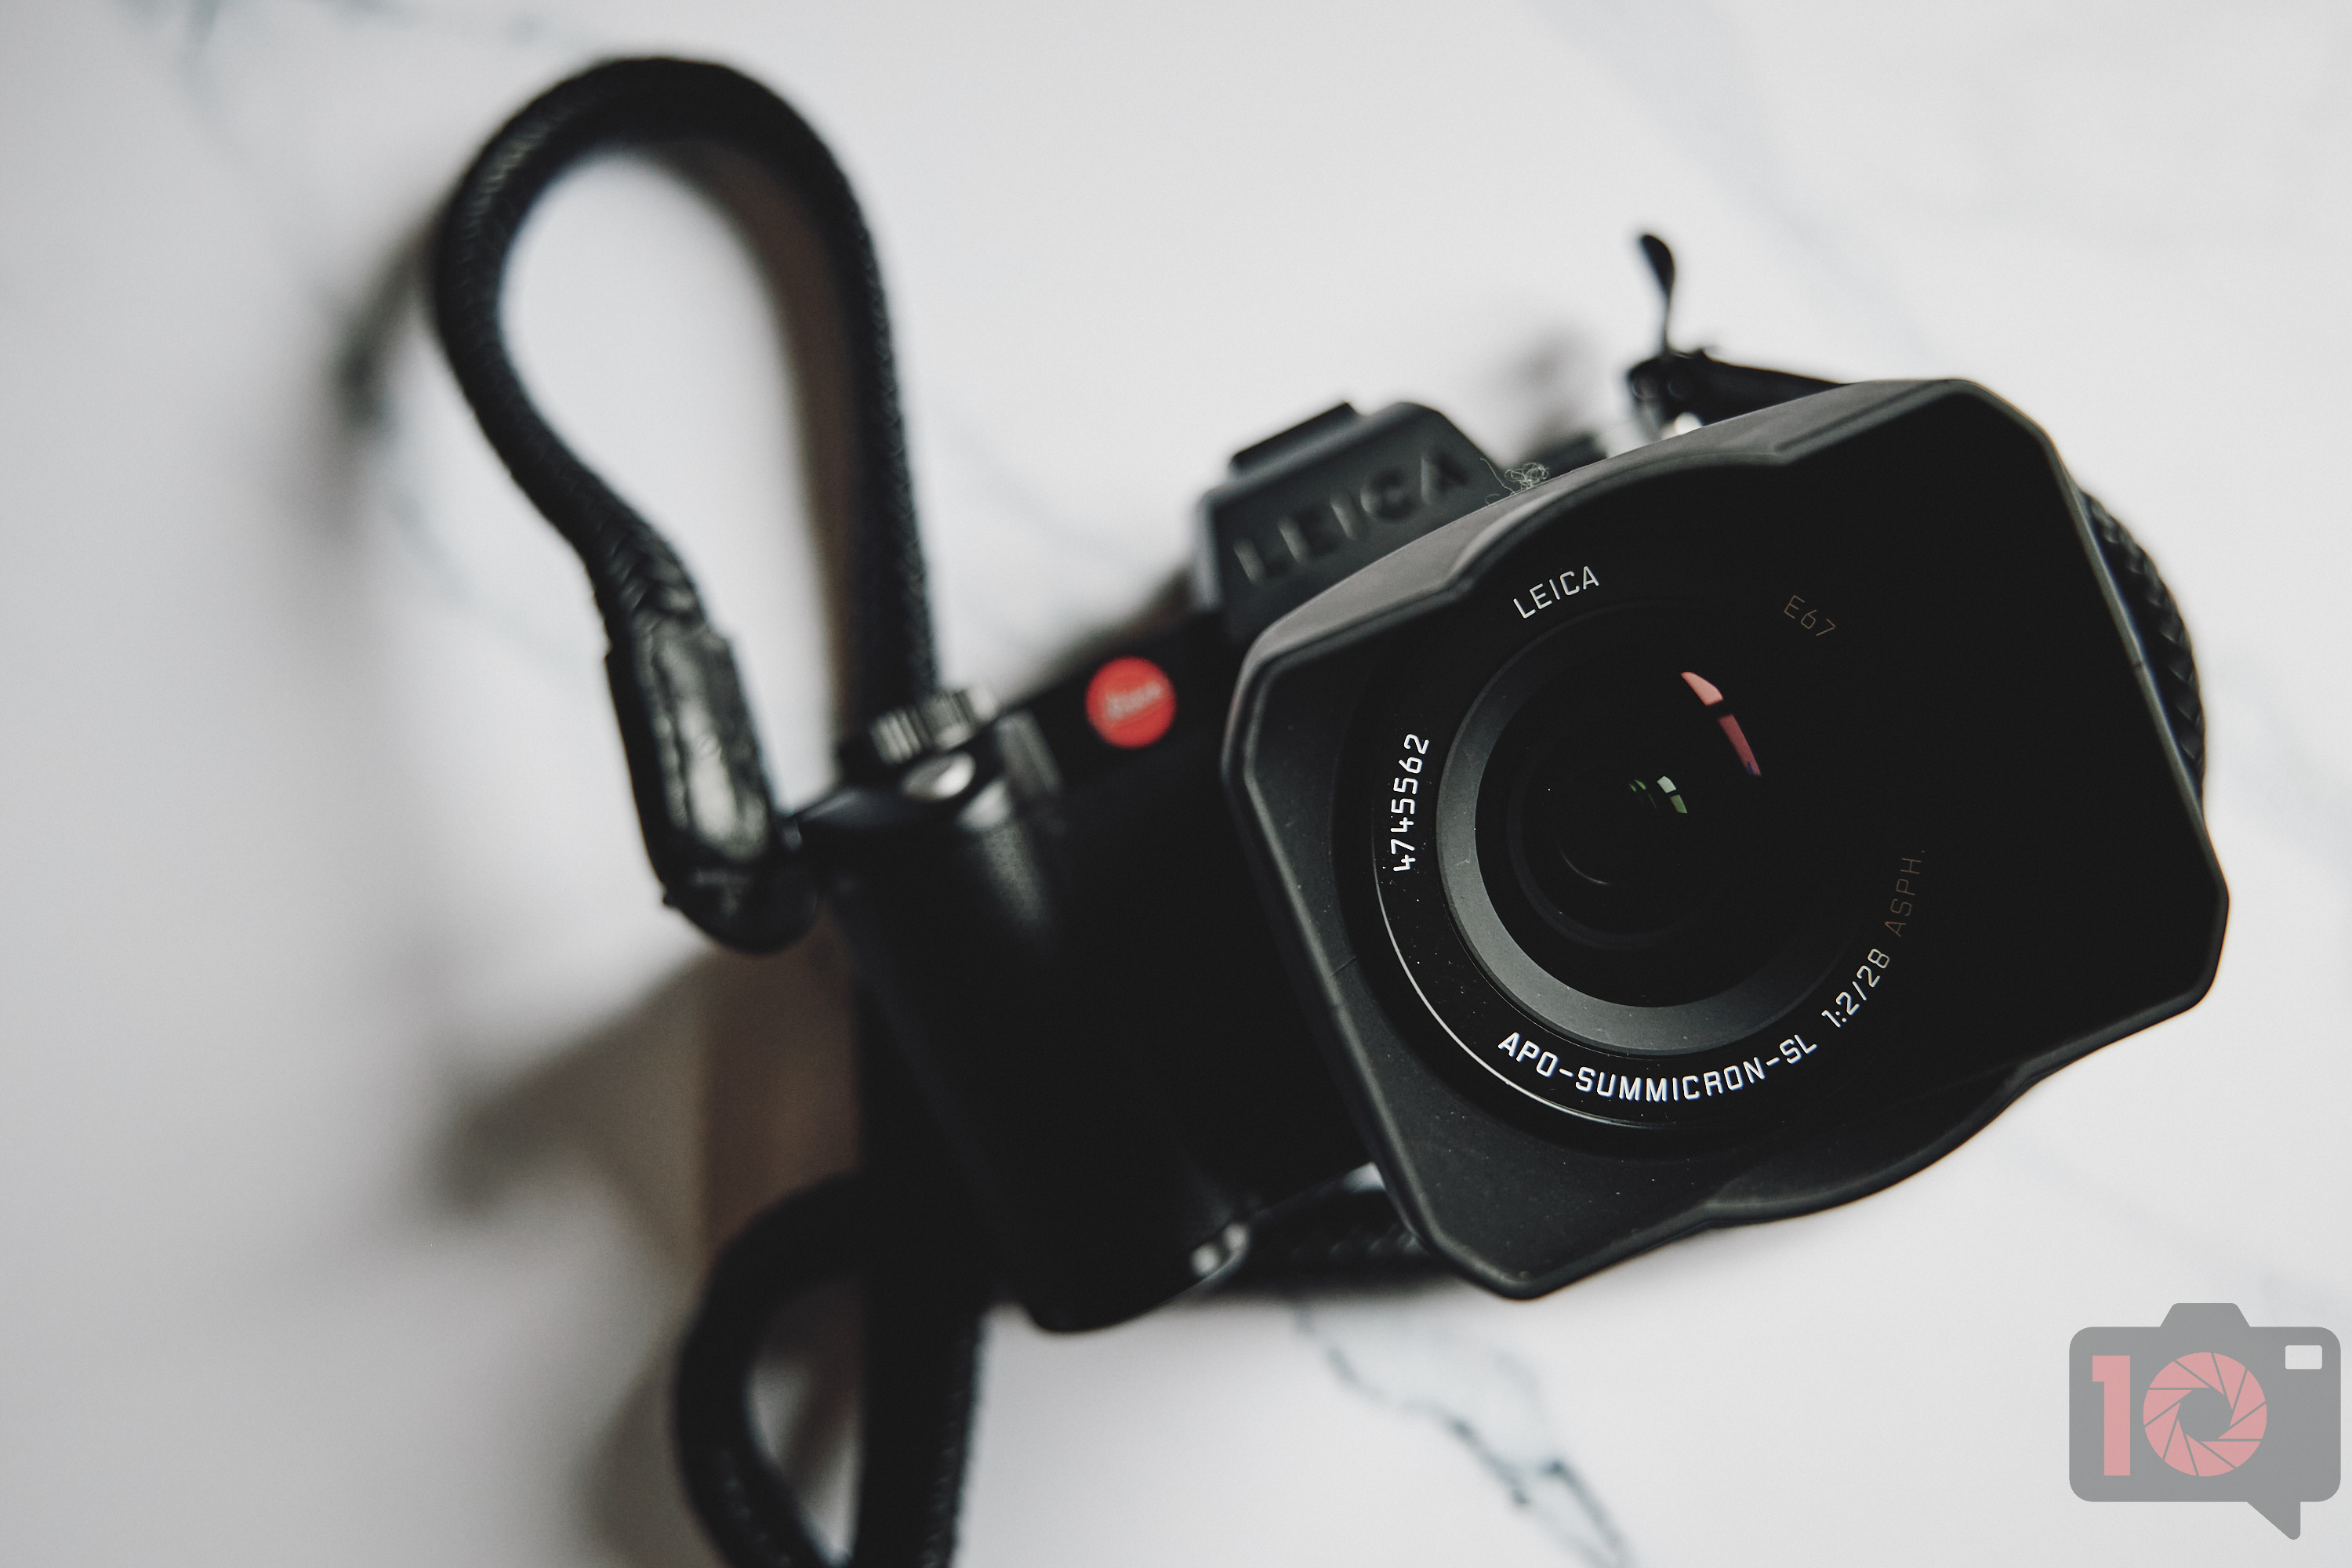 Chris Gampat The Phoblographer Leica 28mm f2 Summicron SL review product images 41-100s1600 2